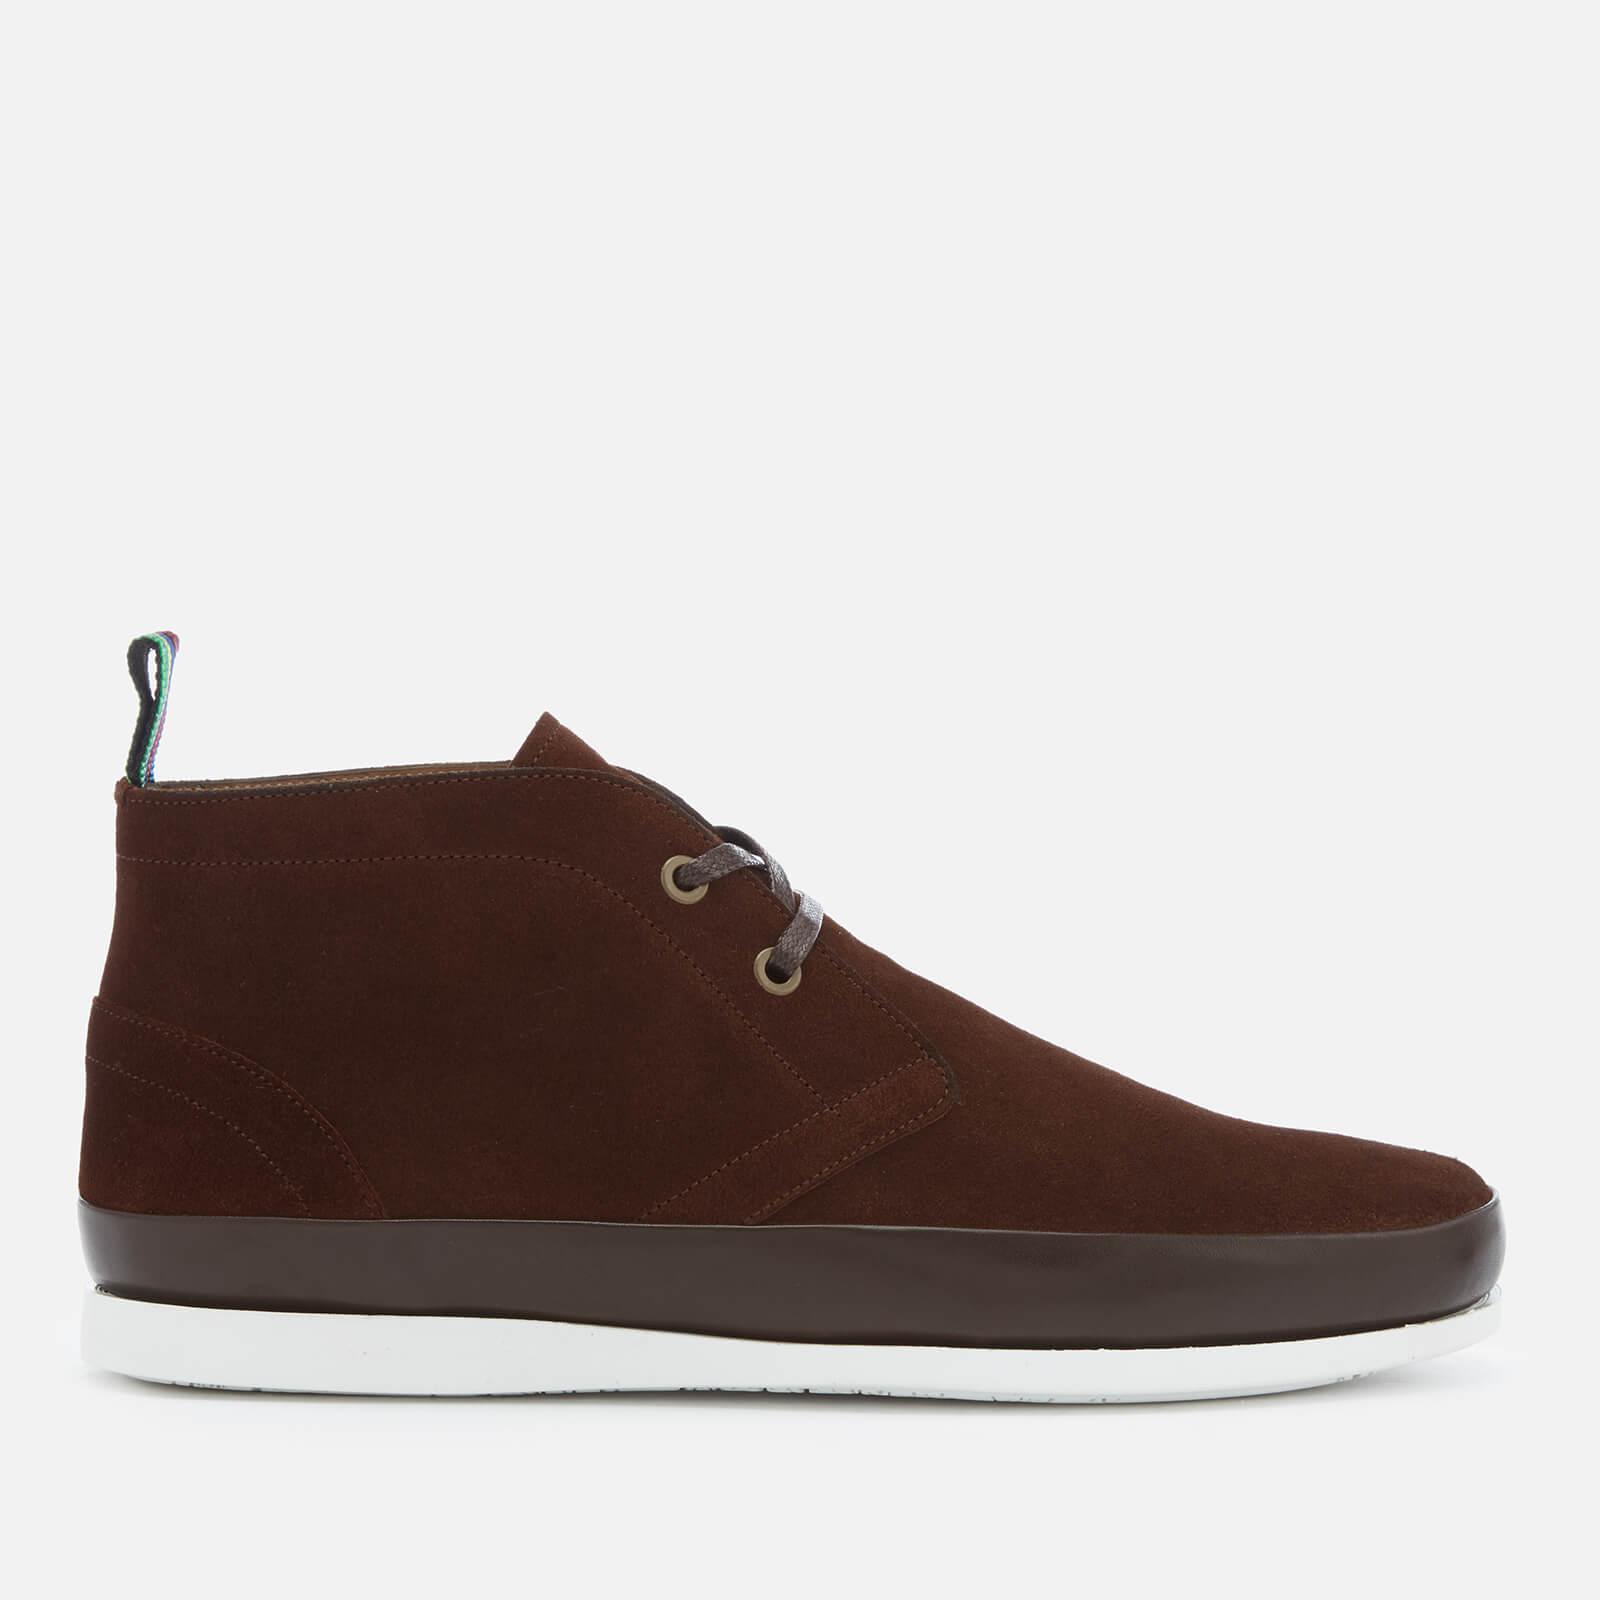 PS by Paul Smith Cleon Suede Chukka Boots in Brown for Men - Lyst